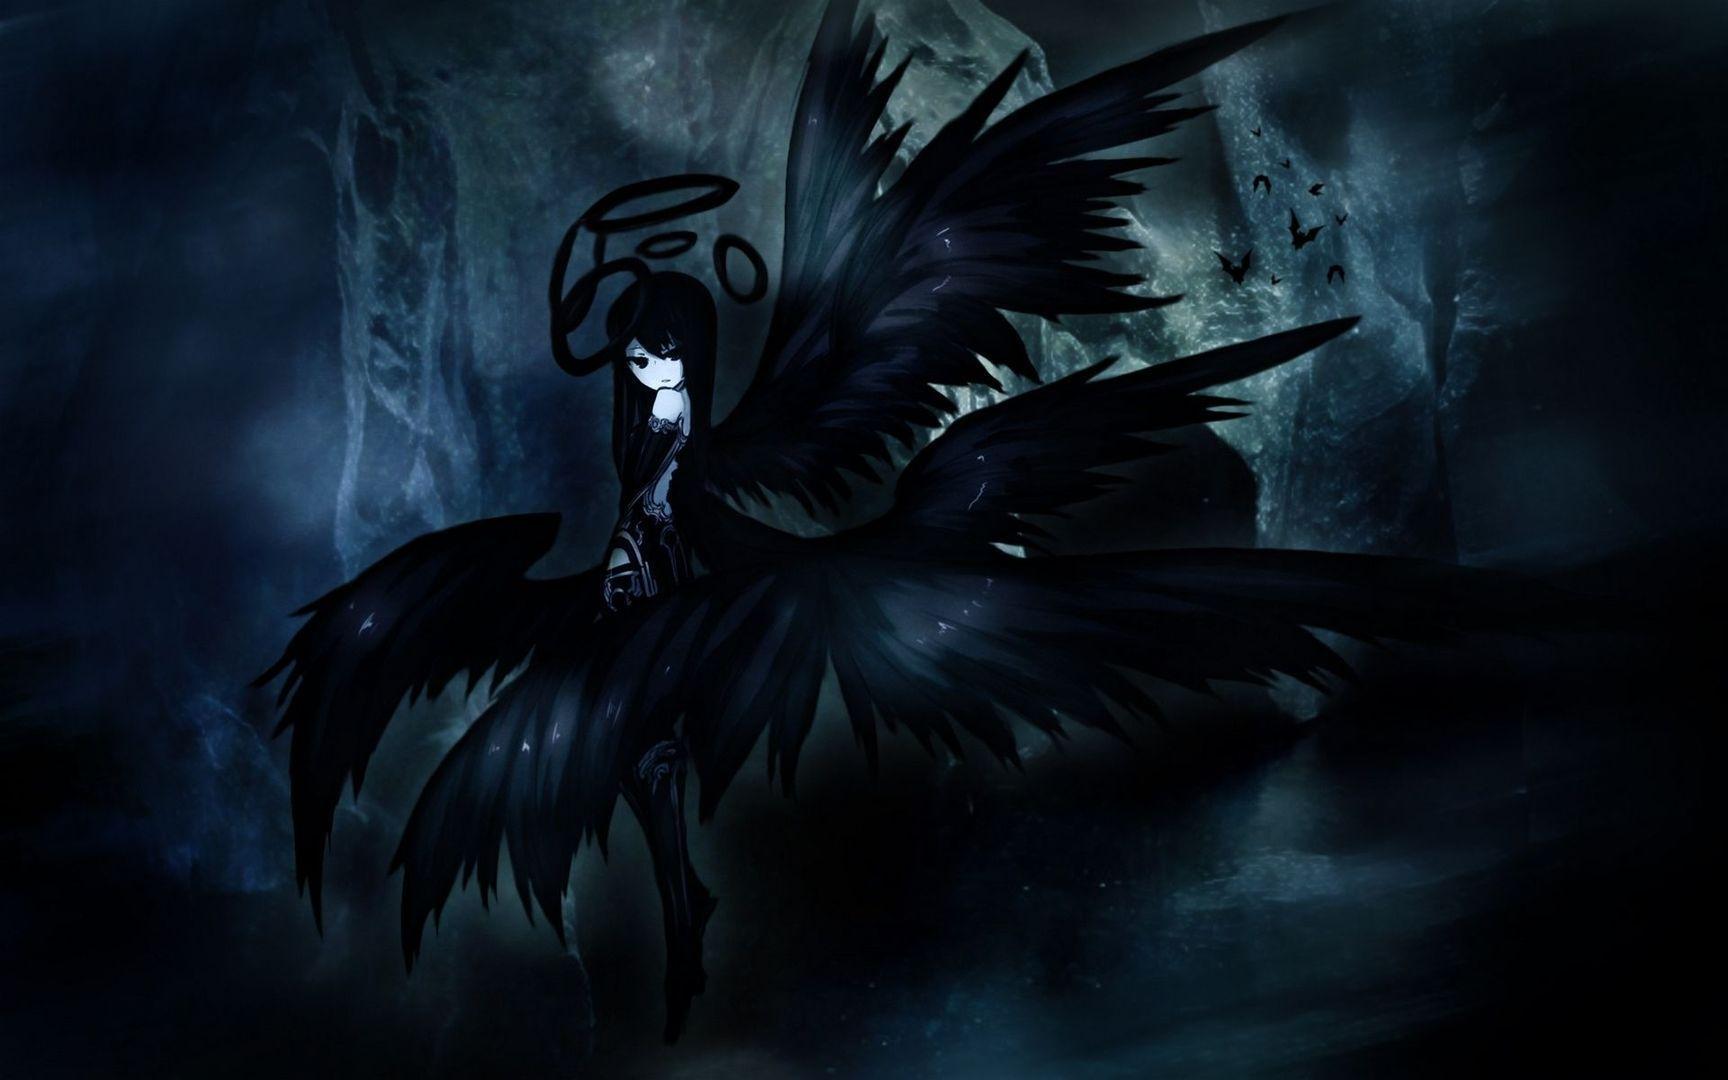 Angel of Darkness by AngelofHapiness on DeviantArt